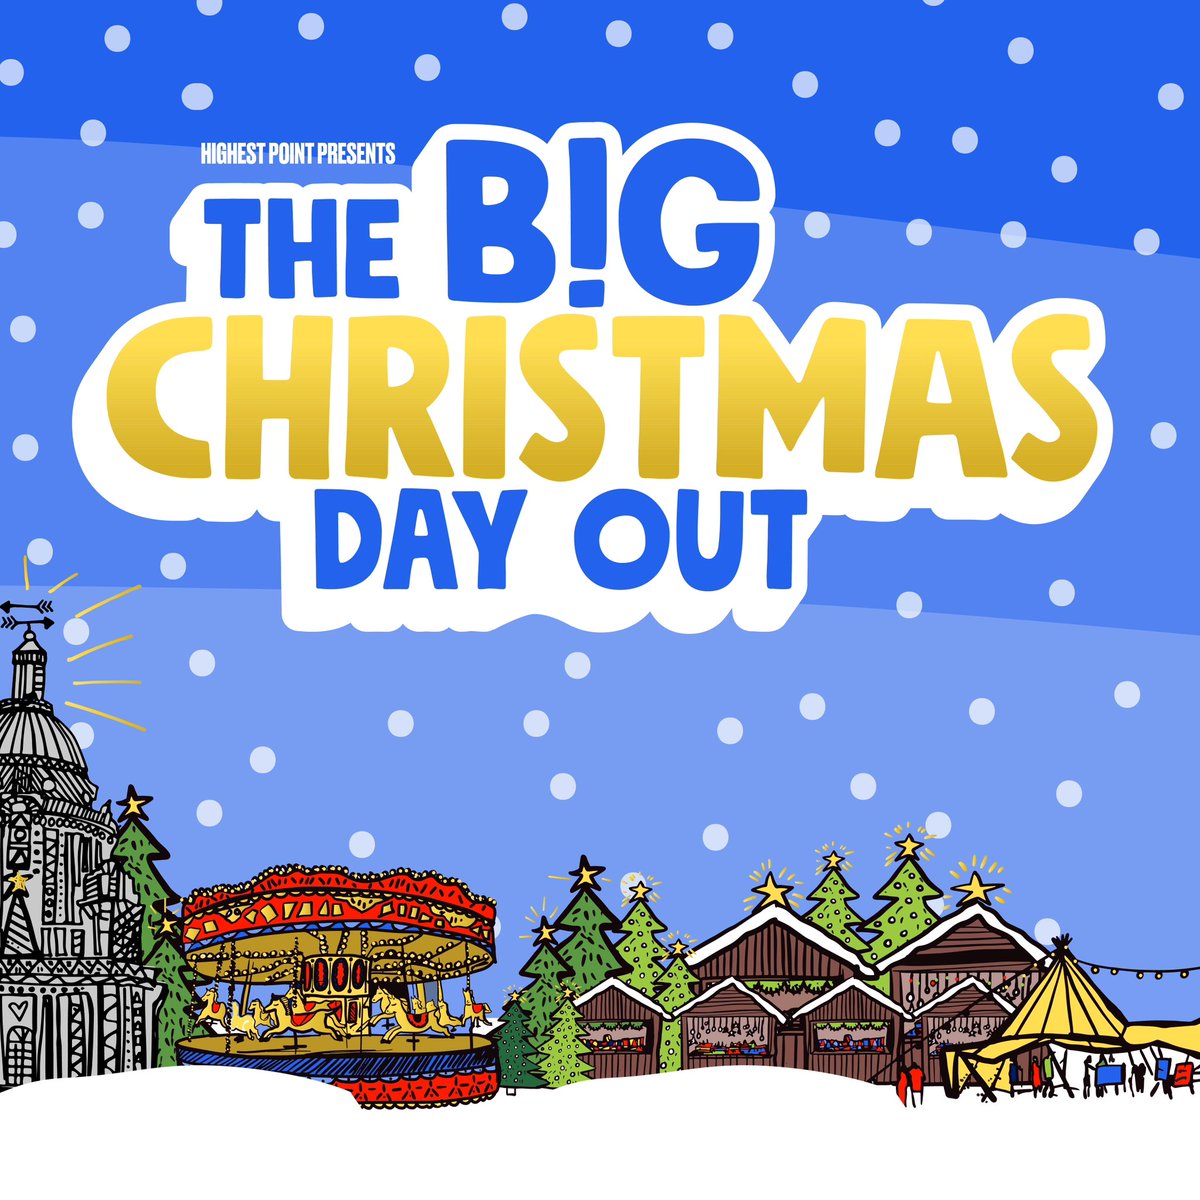 We are really excited to announce that The Big Christmas Day Out will be taking over Williamson Park on Saturday 16th & Sunday 17th December. Tickets on sale today at 10am at @skiddle skiddle.com/e/36692143